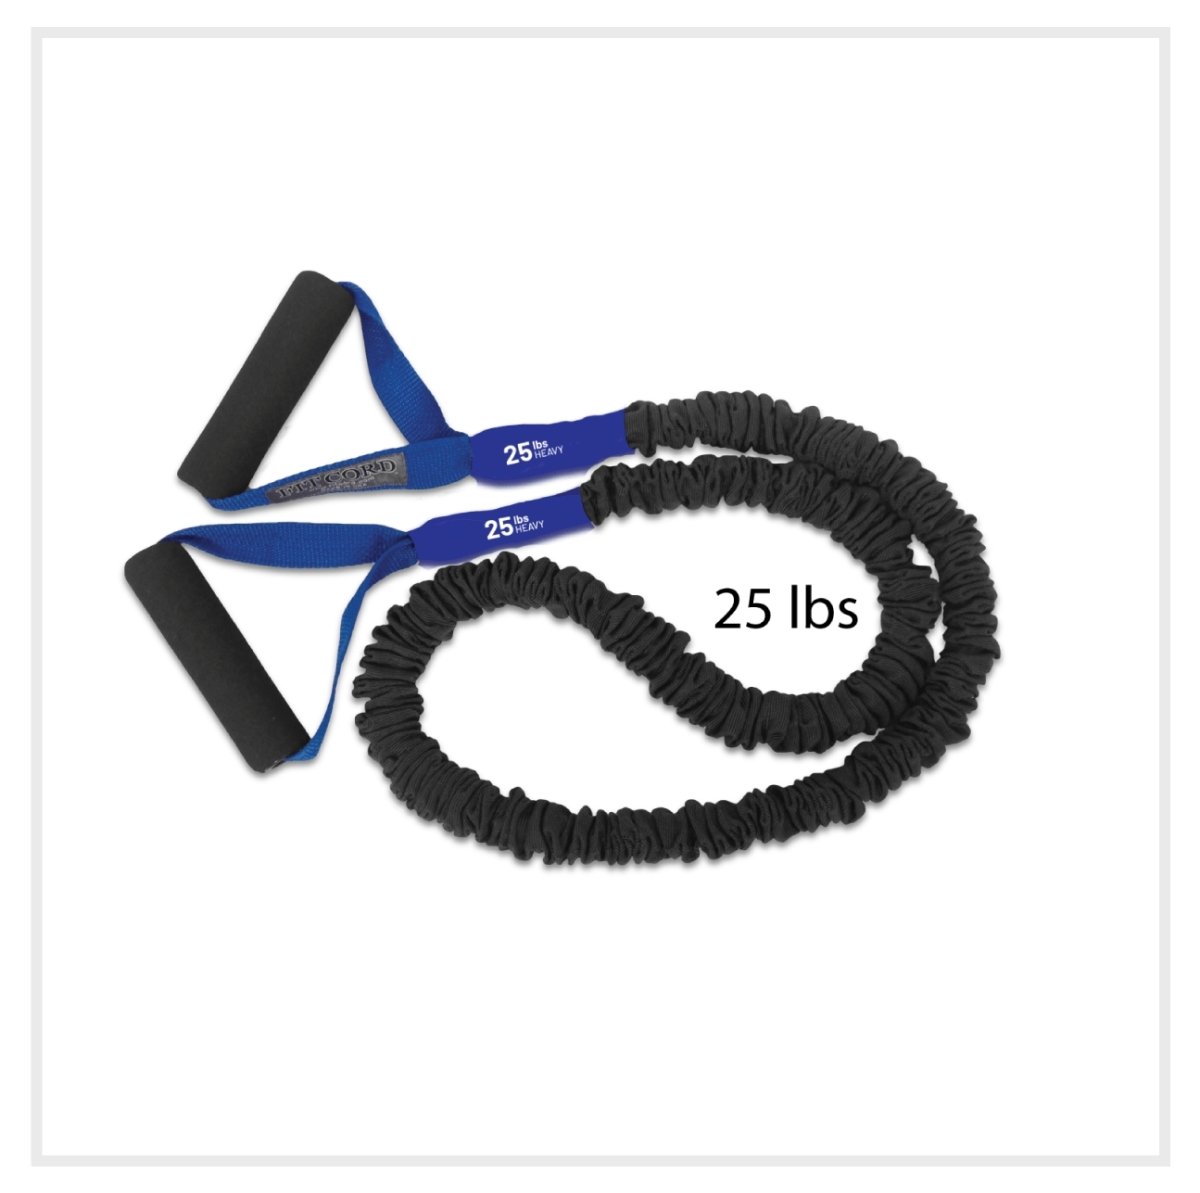 Best Resistance band on the market. America Made Covered exercise band with handles. Compare to stroops and you will find this cord is much better quality for the same price.